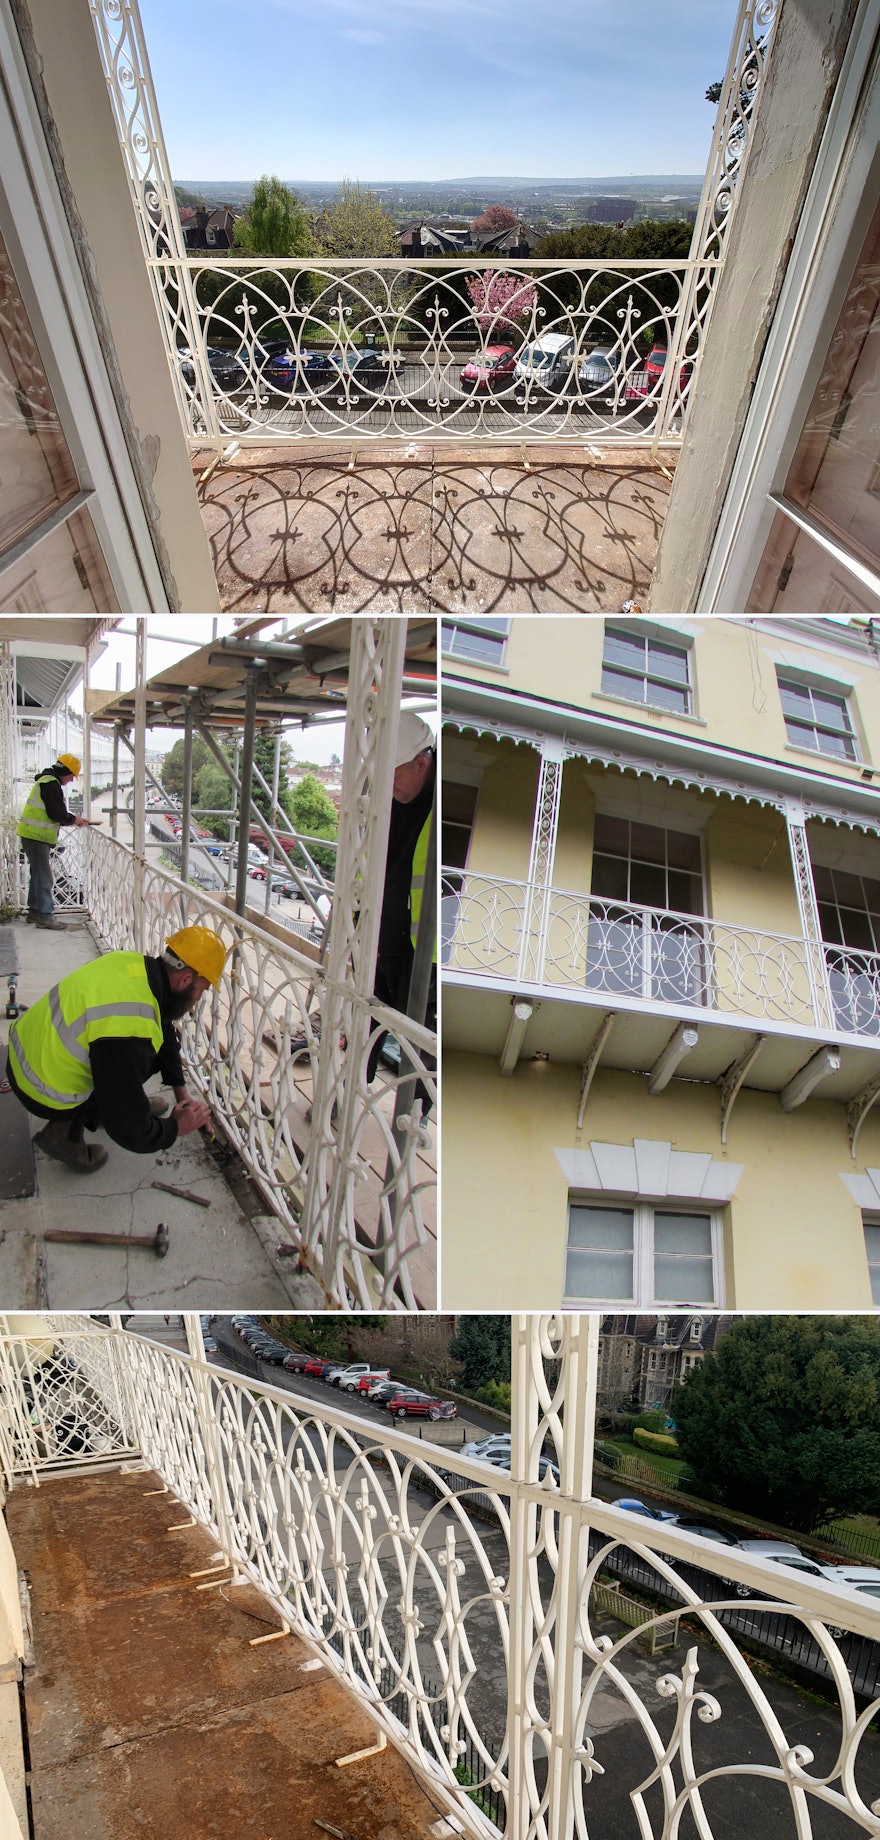 Images of the balcony restoration.